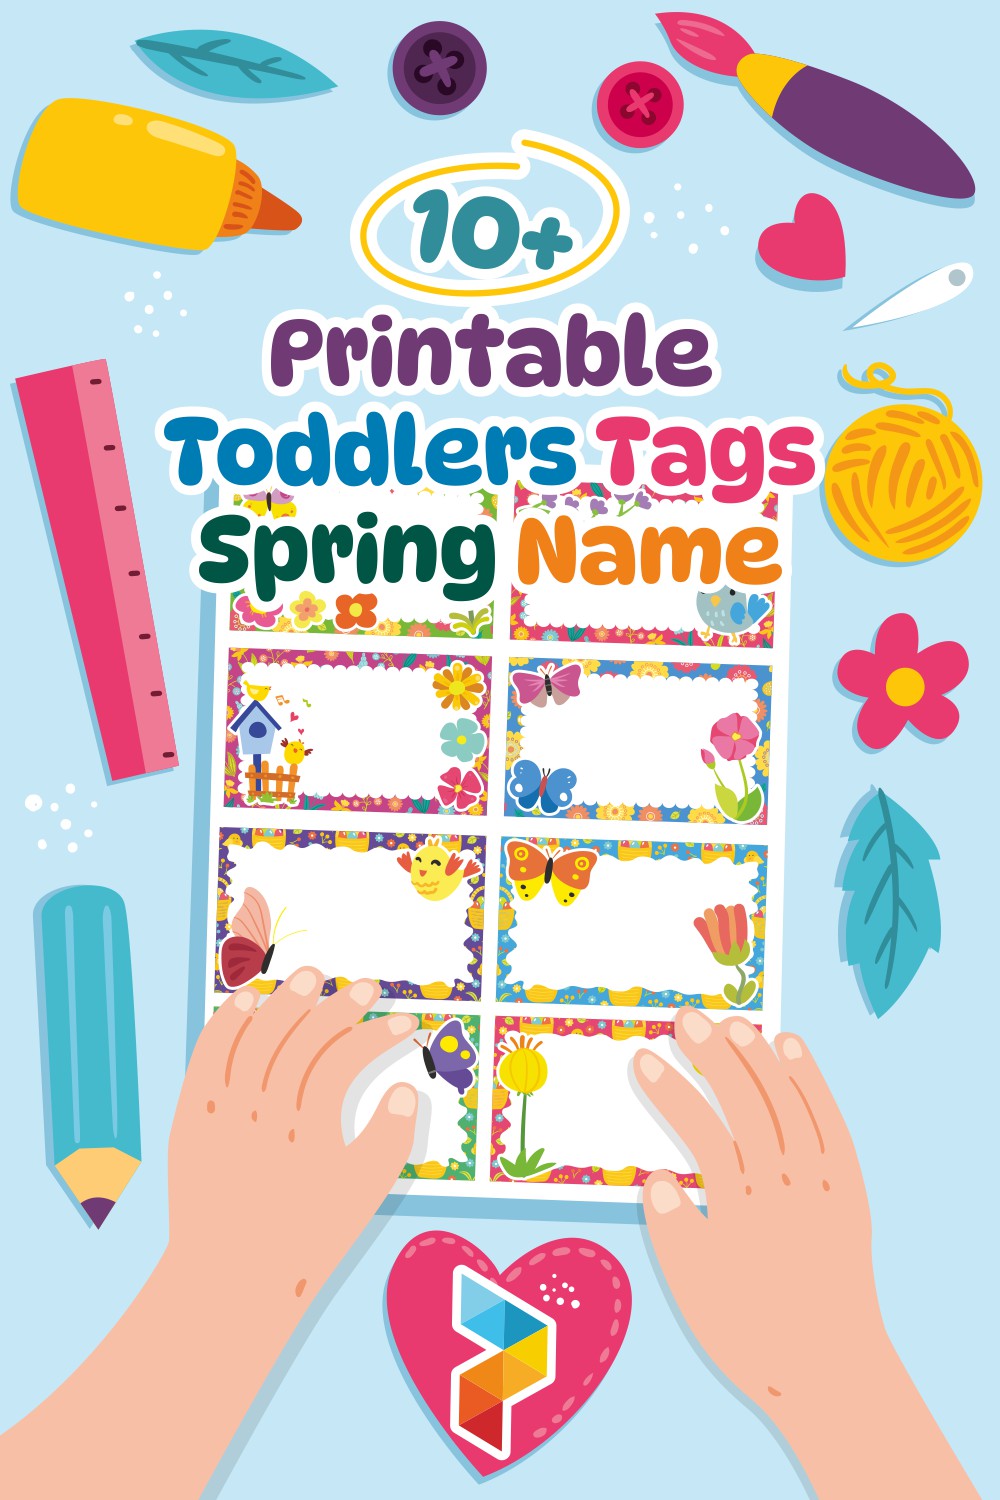 Toddlers Tags Spring Name